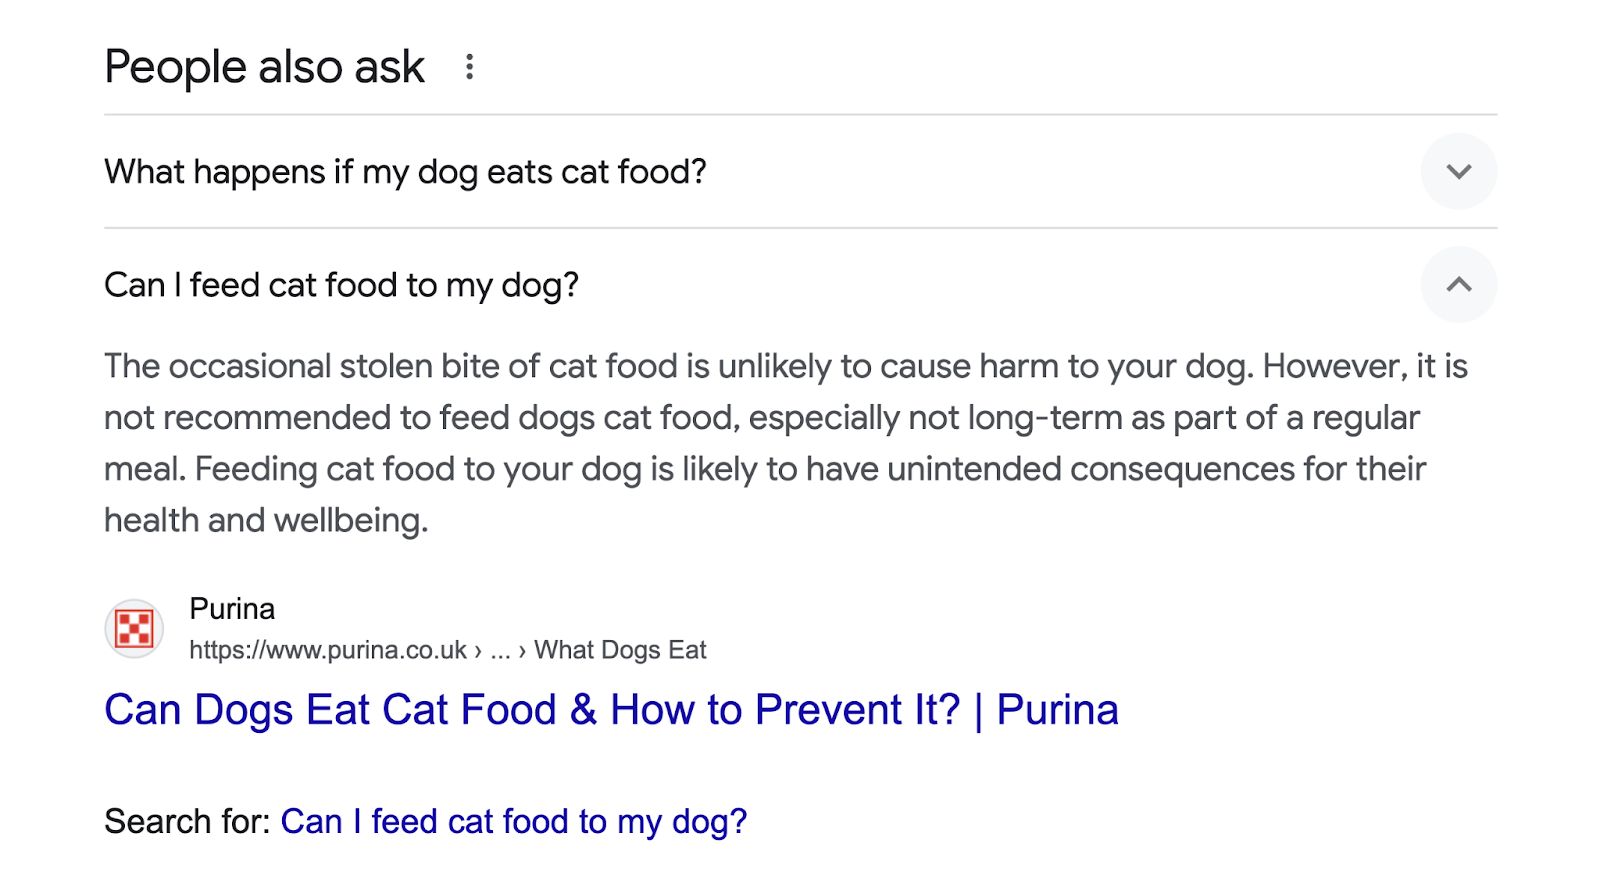 People also ask serp feature for can dogs eat cat food has drop down menu with answers to related common questions